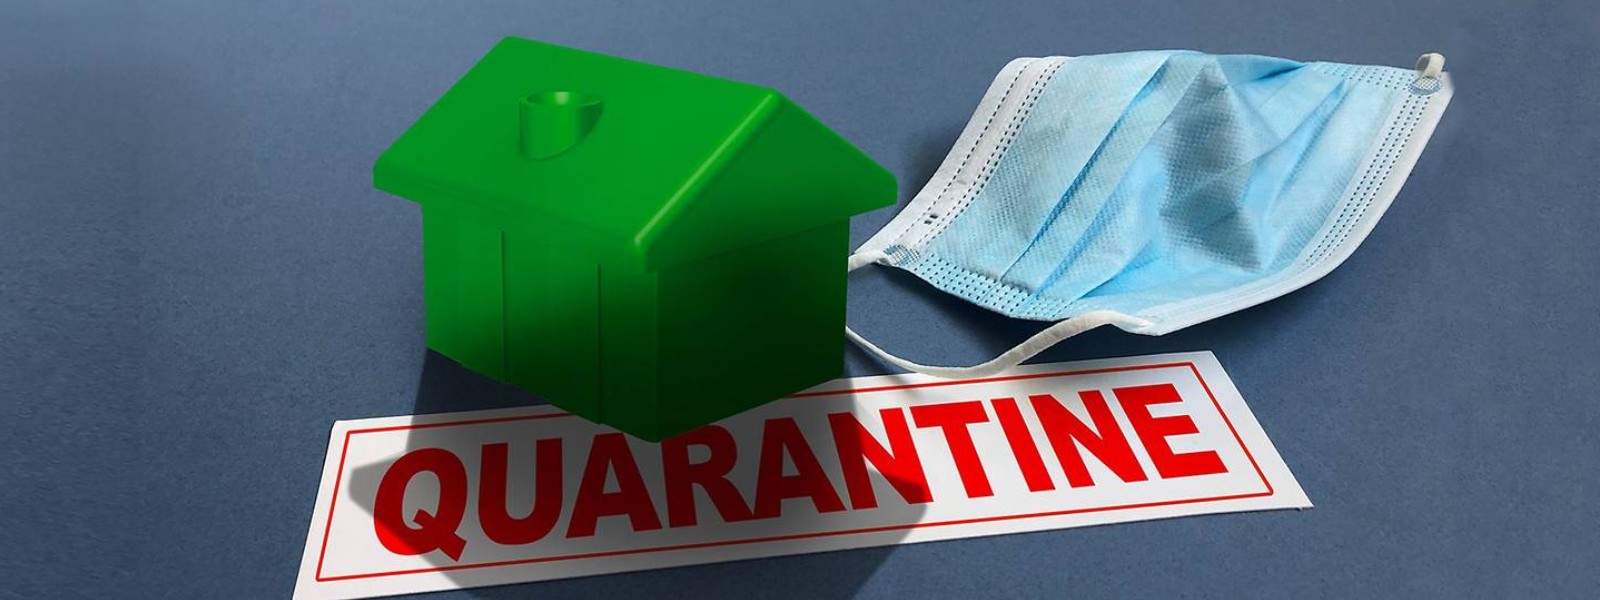 Quarantine period to be reviewed; over 14,000 PCR tests conducted daily